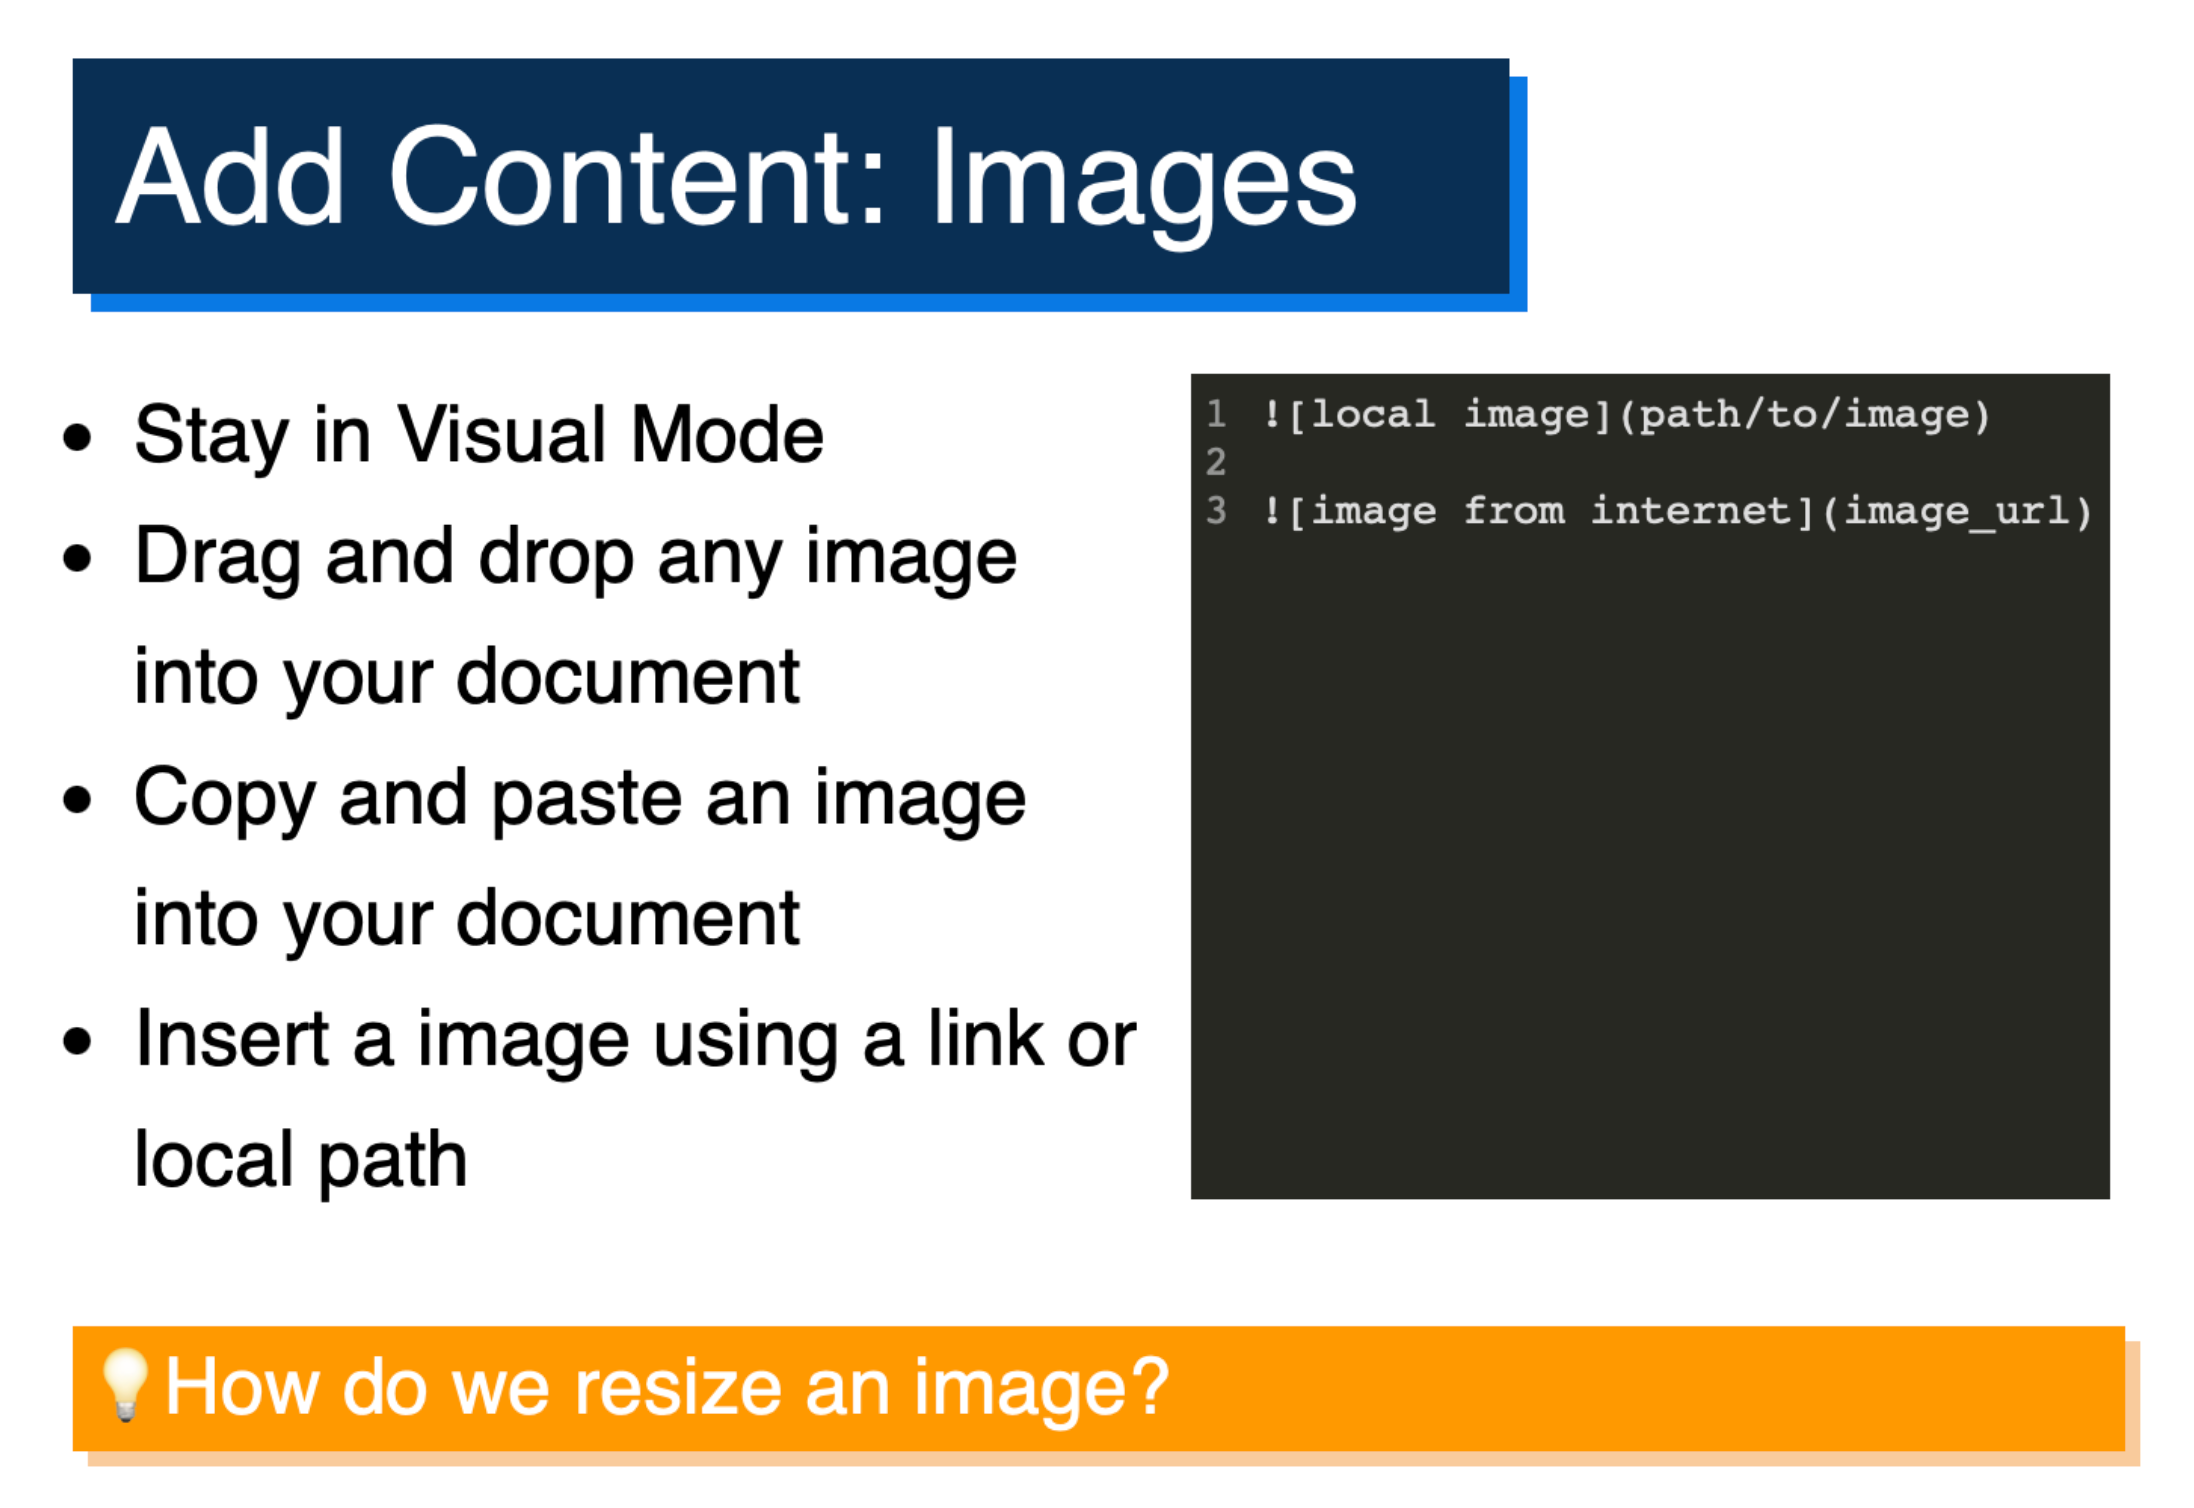 Sample slide from workshop with the title "Add Content: Images", instructions for the pre-planned exercise given in black dot points next to the code required to complete the exercise, and an orange call-out box at the bottom with the question "How do we resize images?".